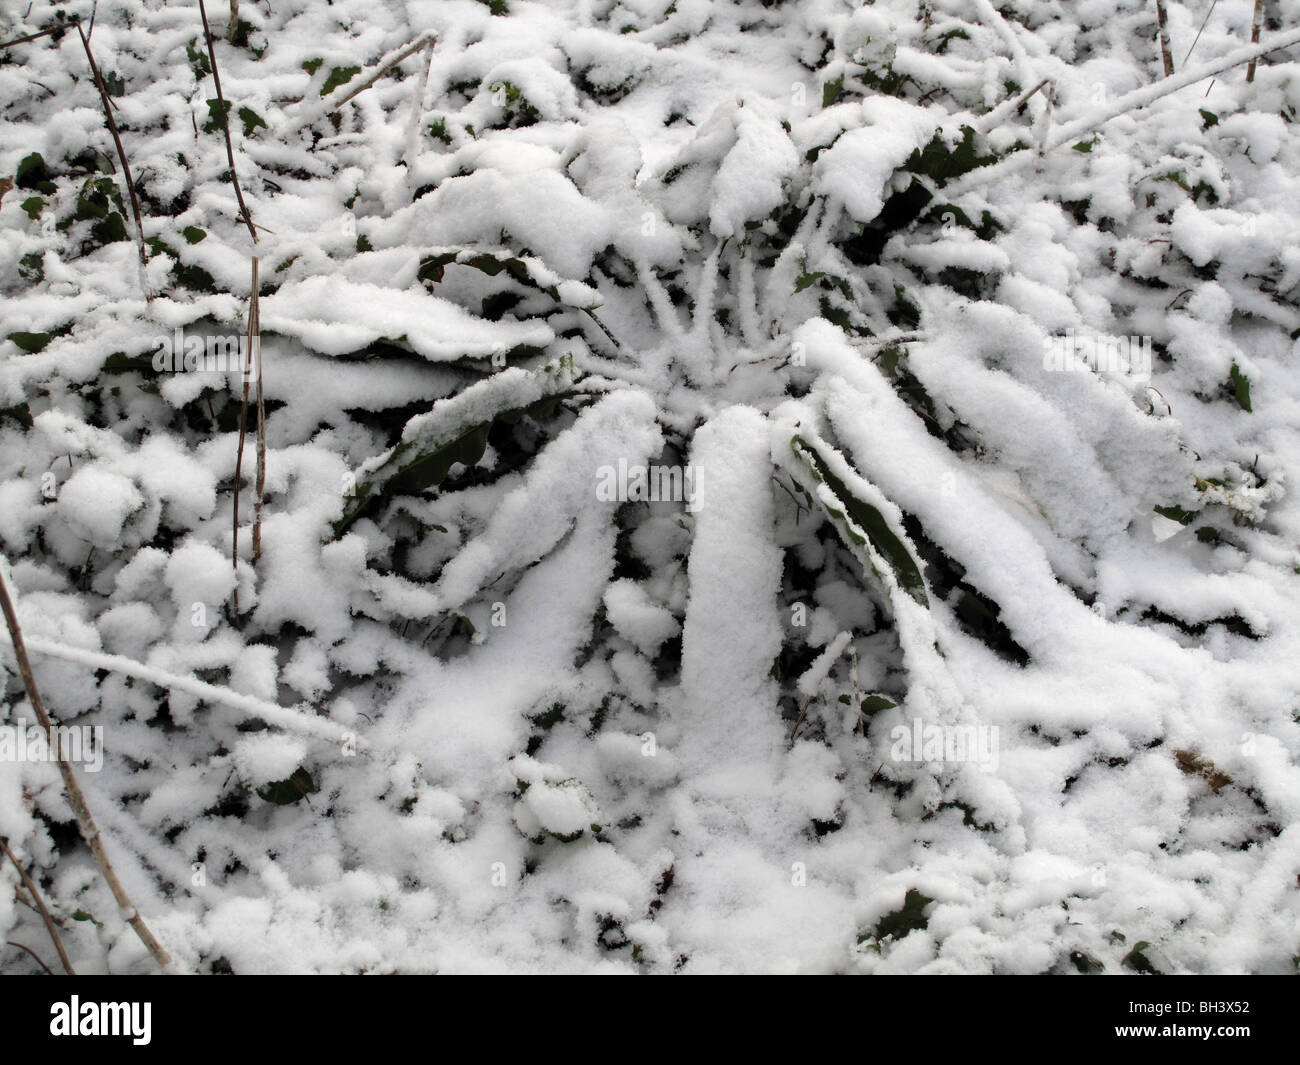 Harts tongue fern (Asplenium scolopendrium) leaves covered by snow in light woodland Stock Photo